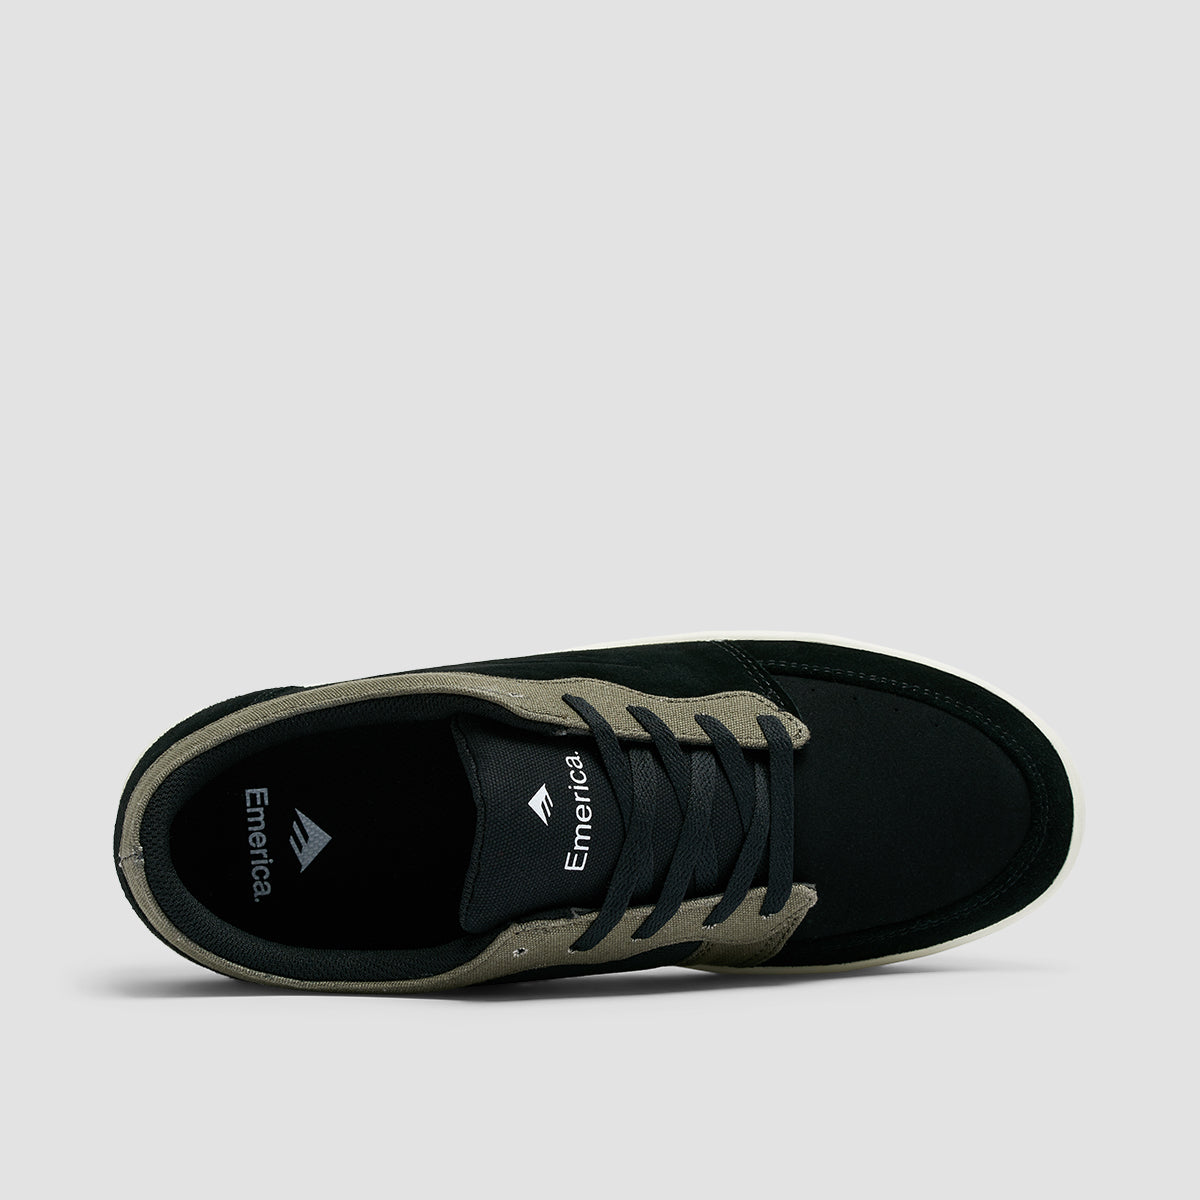 Emerica Quentin Shoes Black/Olive